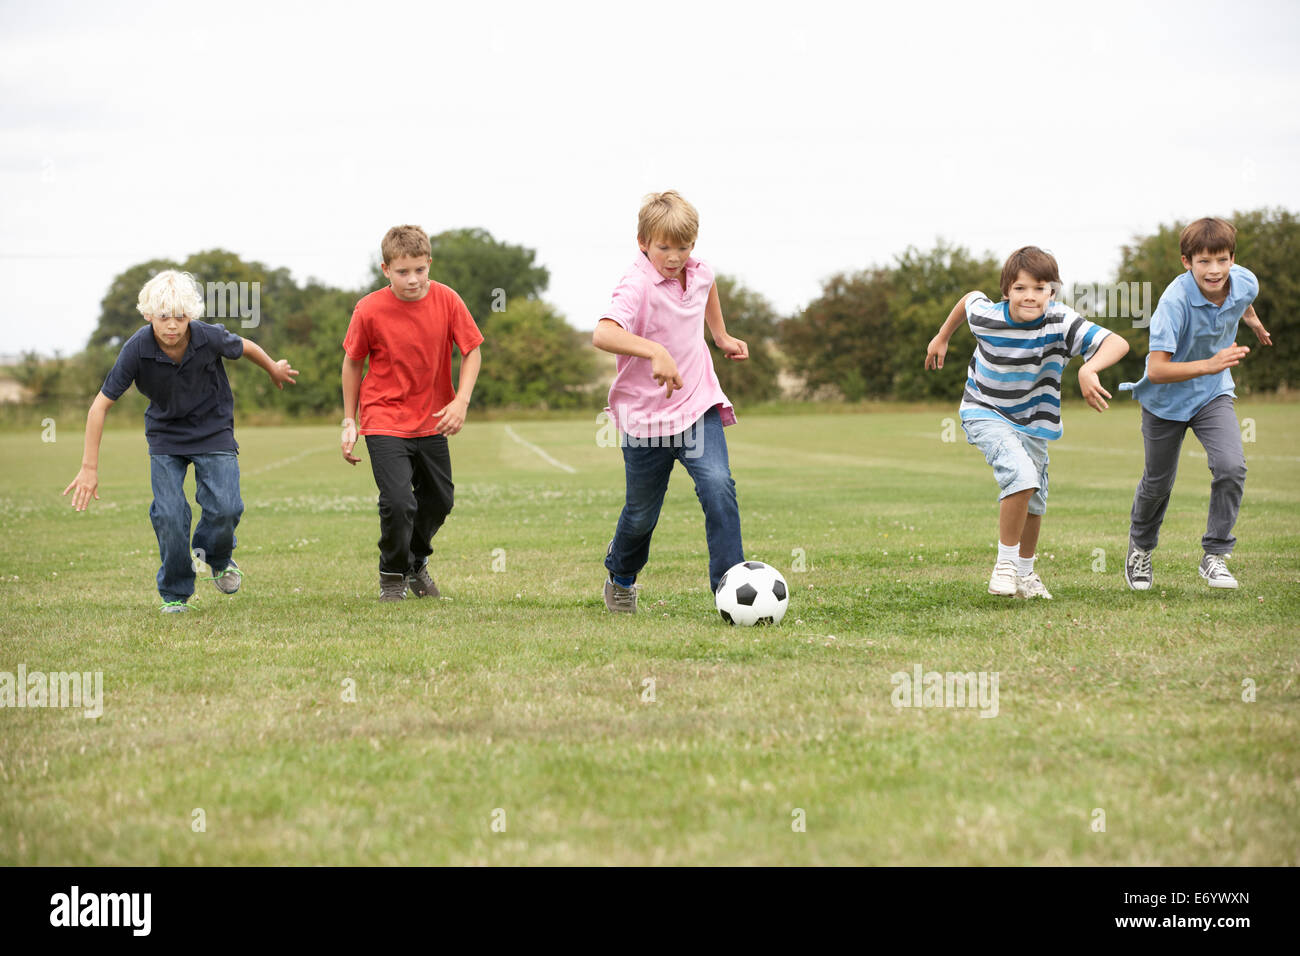 Boys playing with football in park Stock Photo